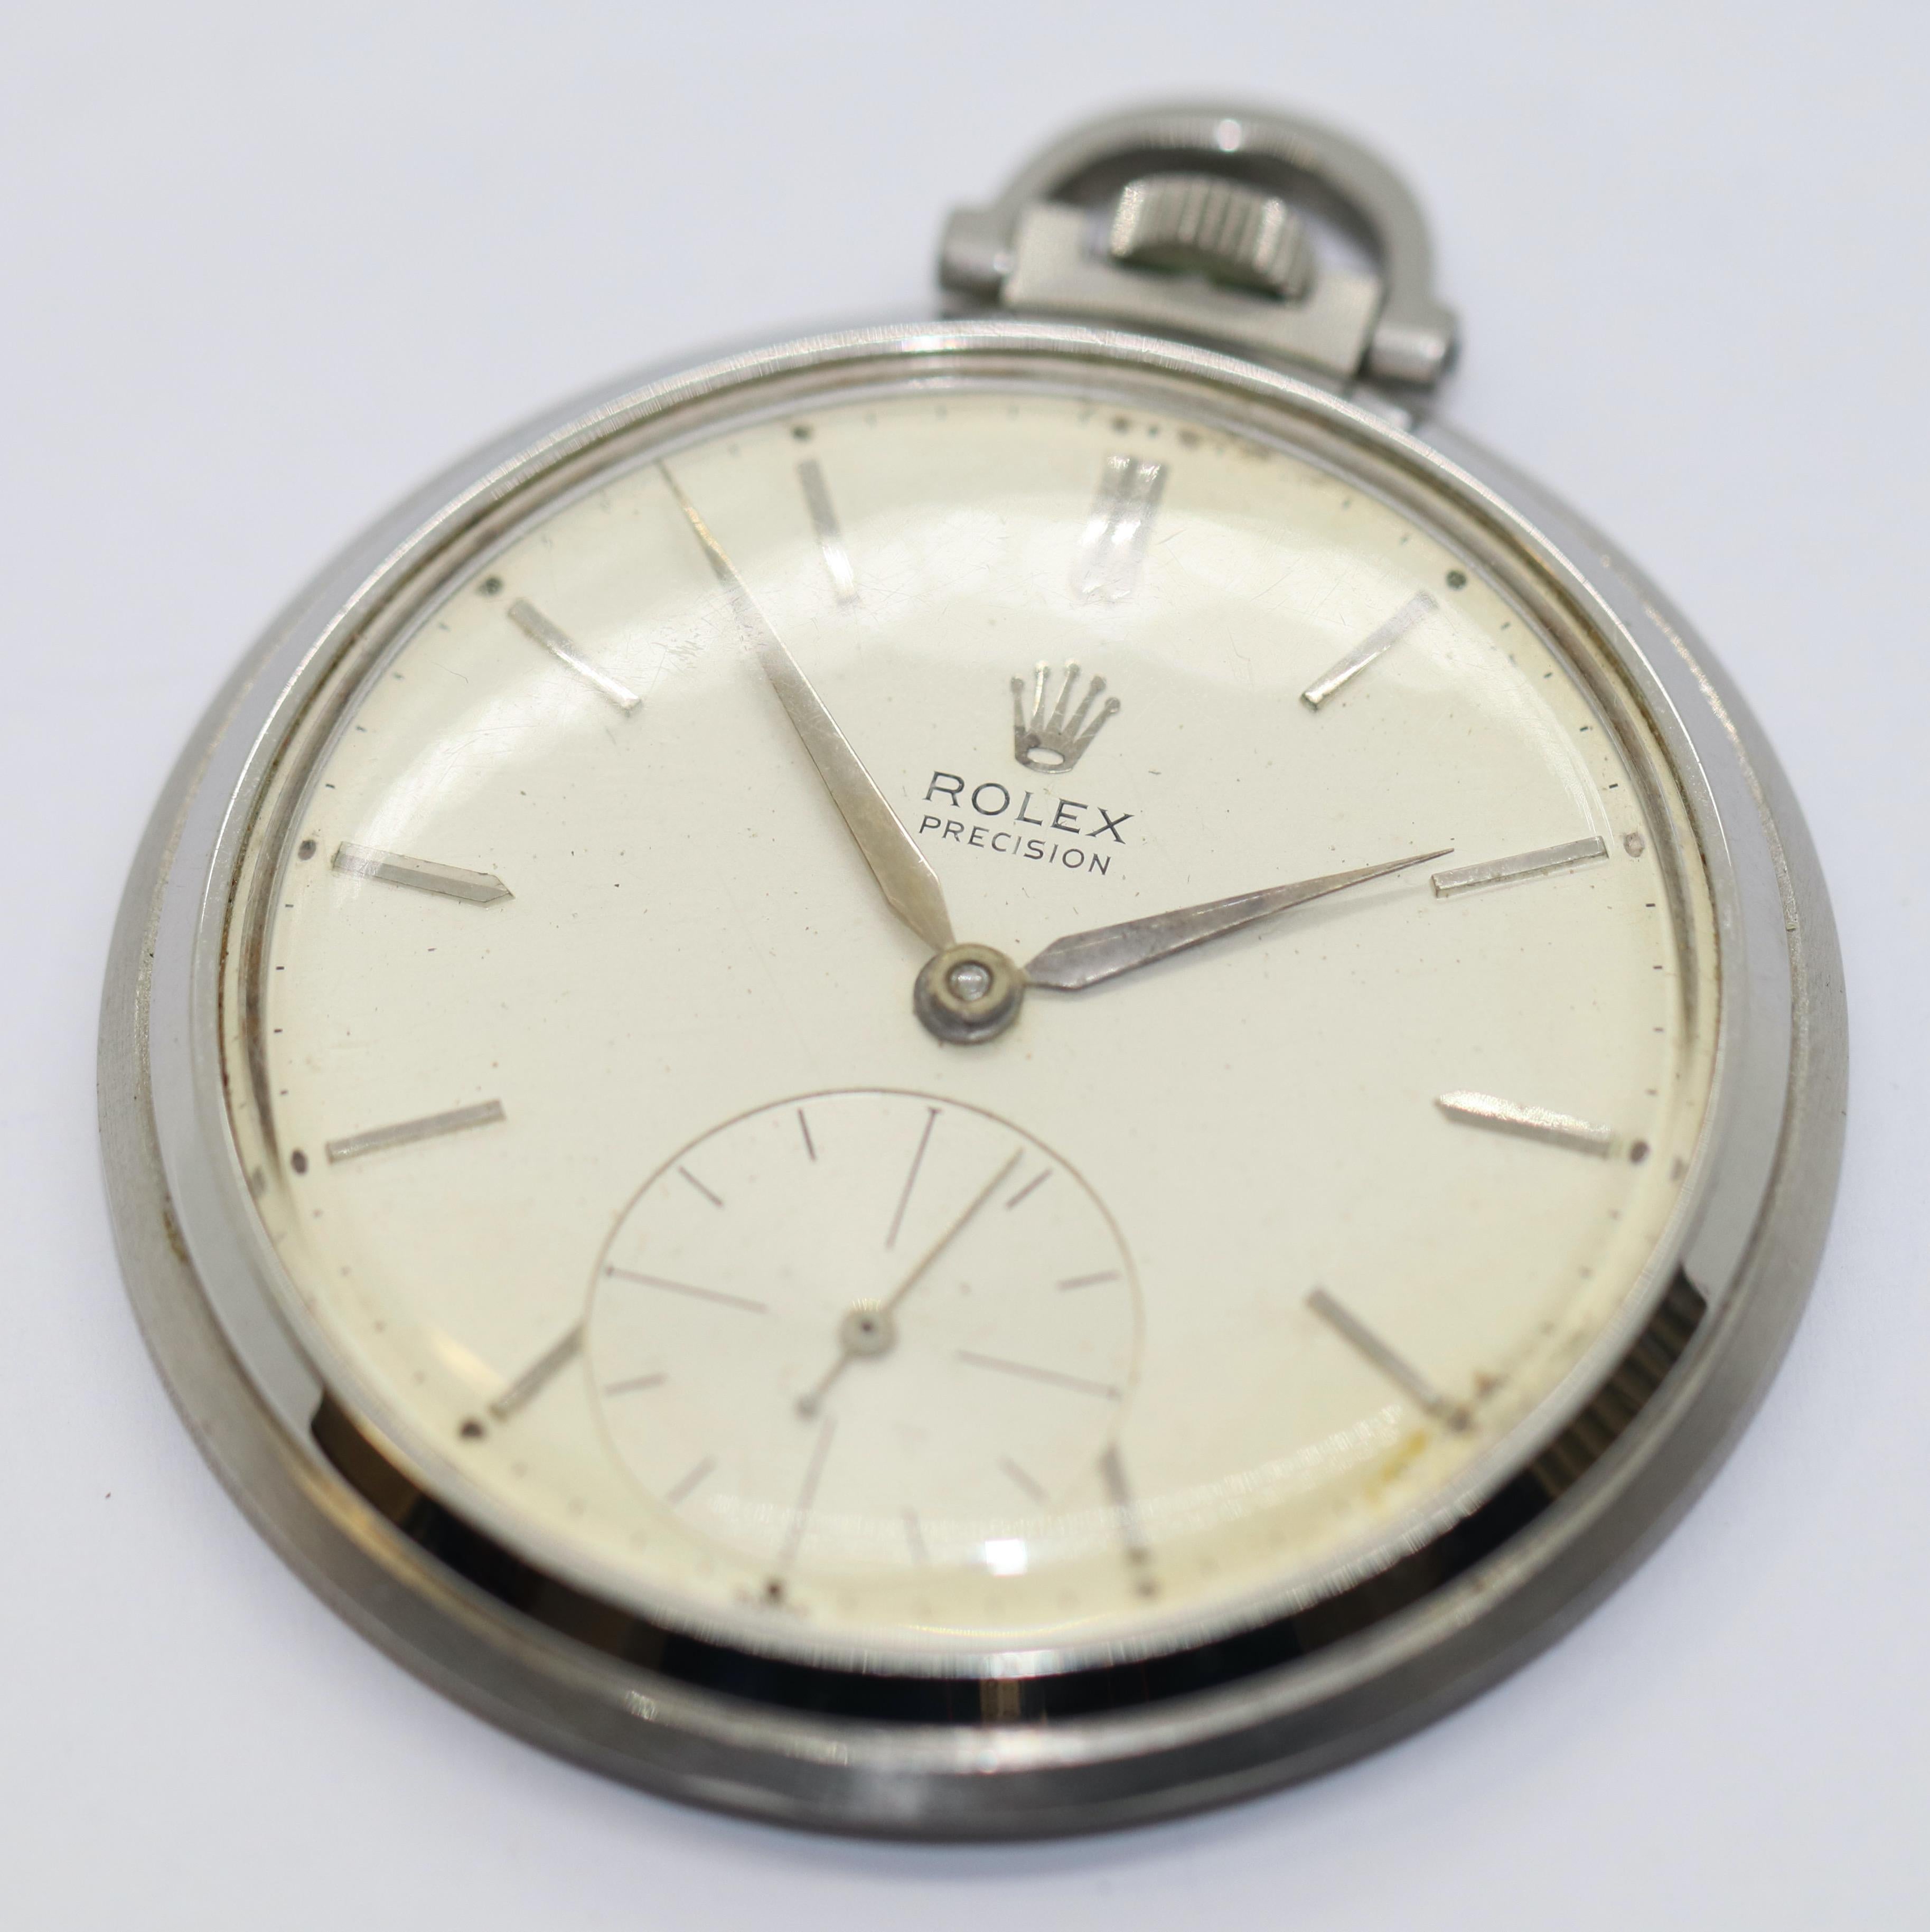 Rolex Precision Ref. 3400 Openface, Keyless Lever Pocket Watch, Stainless Steel In Fair Condition For Sale In Berlin, DE